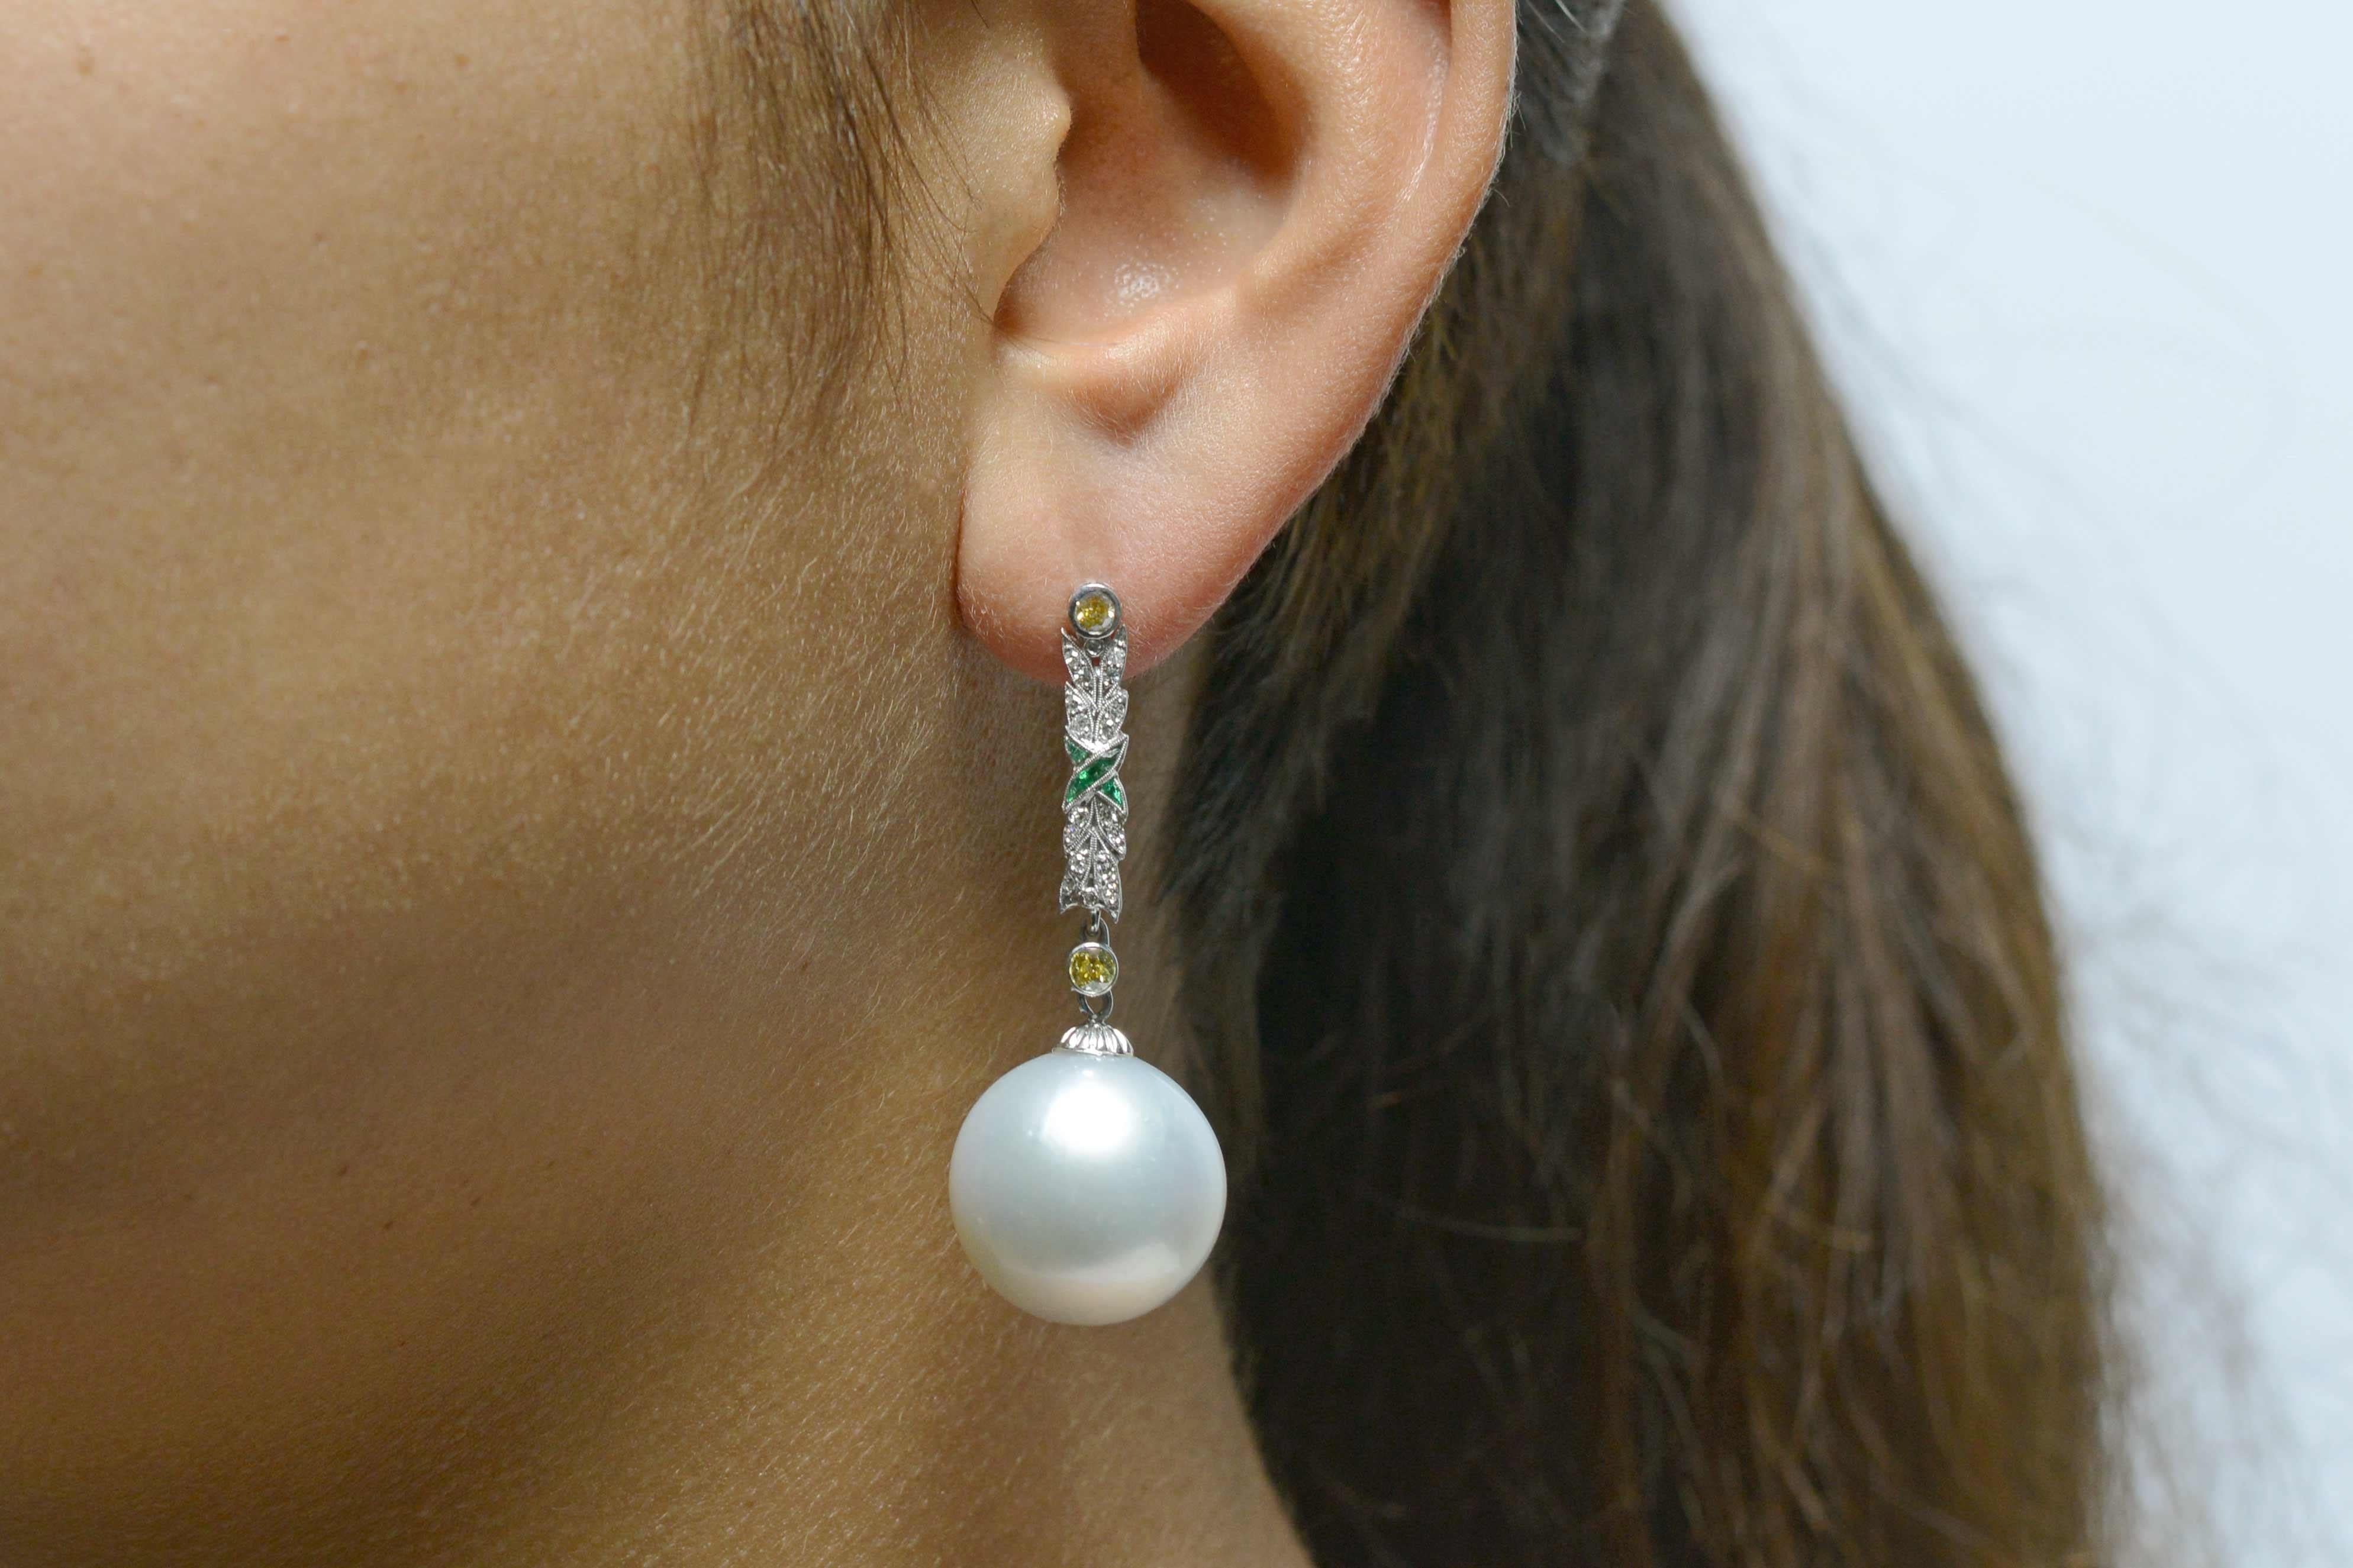 A most magnificent pair of giant South Sea Pearl drop earrings that dangle dramatically, suspended from dazzling yellow and white diamond sections bisected with an alluring emerald criss cross. Fabricated from platinum with great attention to